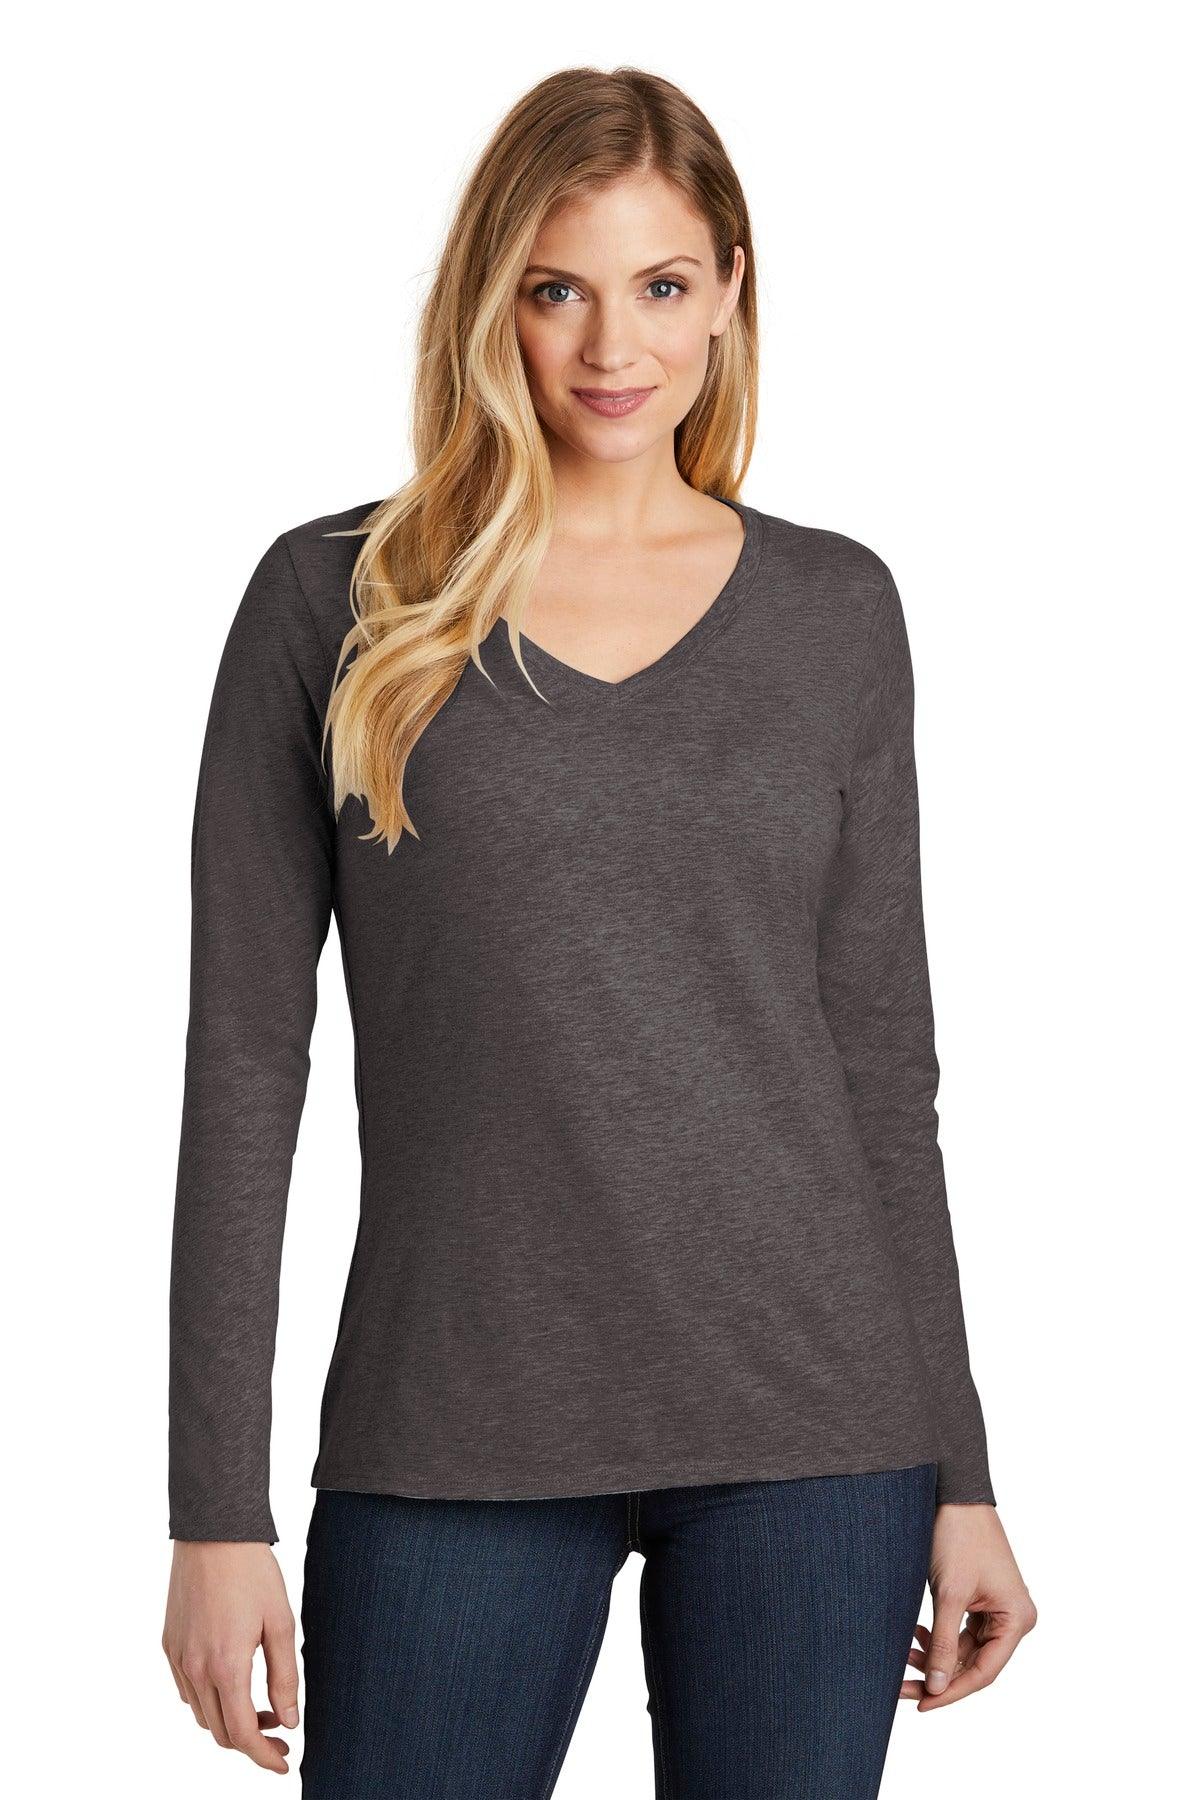 District Women's Very Important Tee Long Sleeve V-Neck. DT6201 - Dresses Max